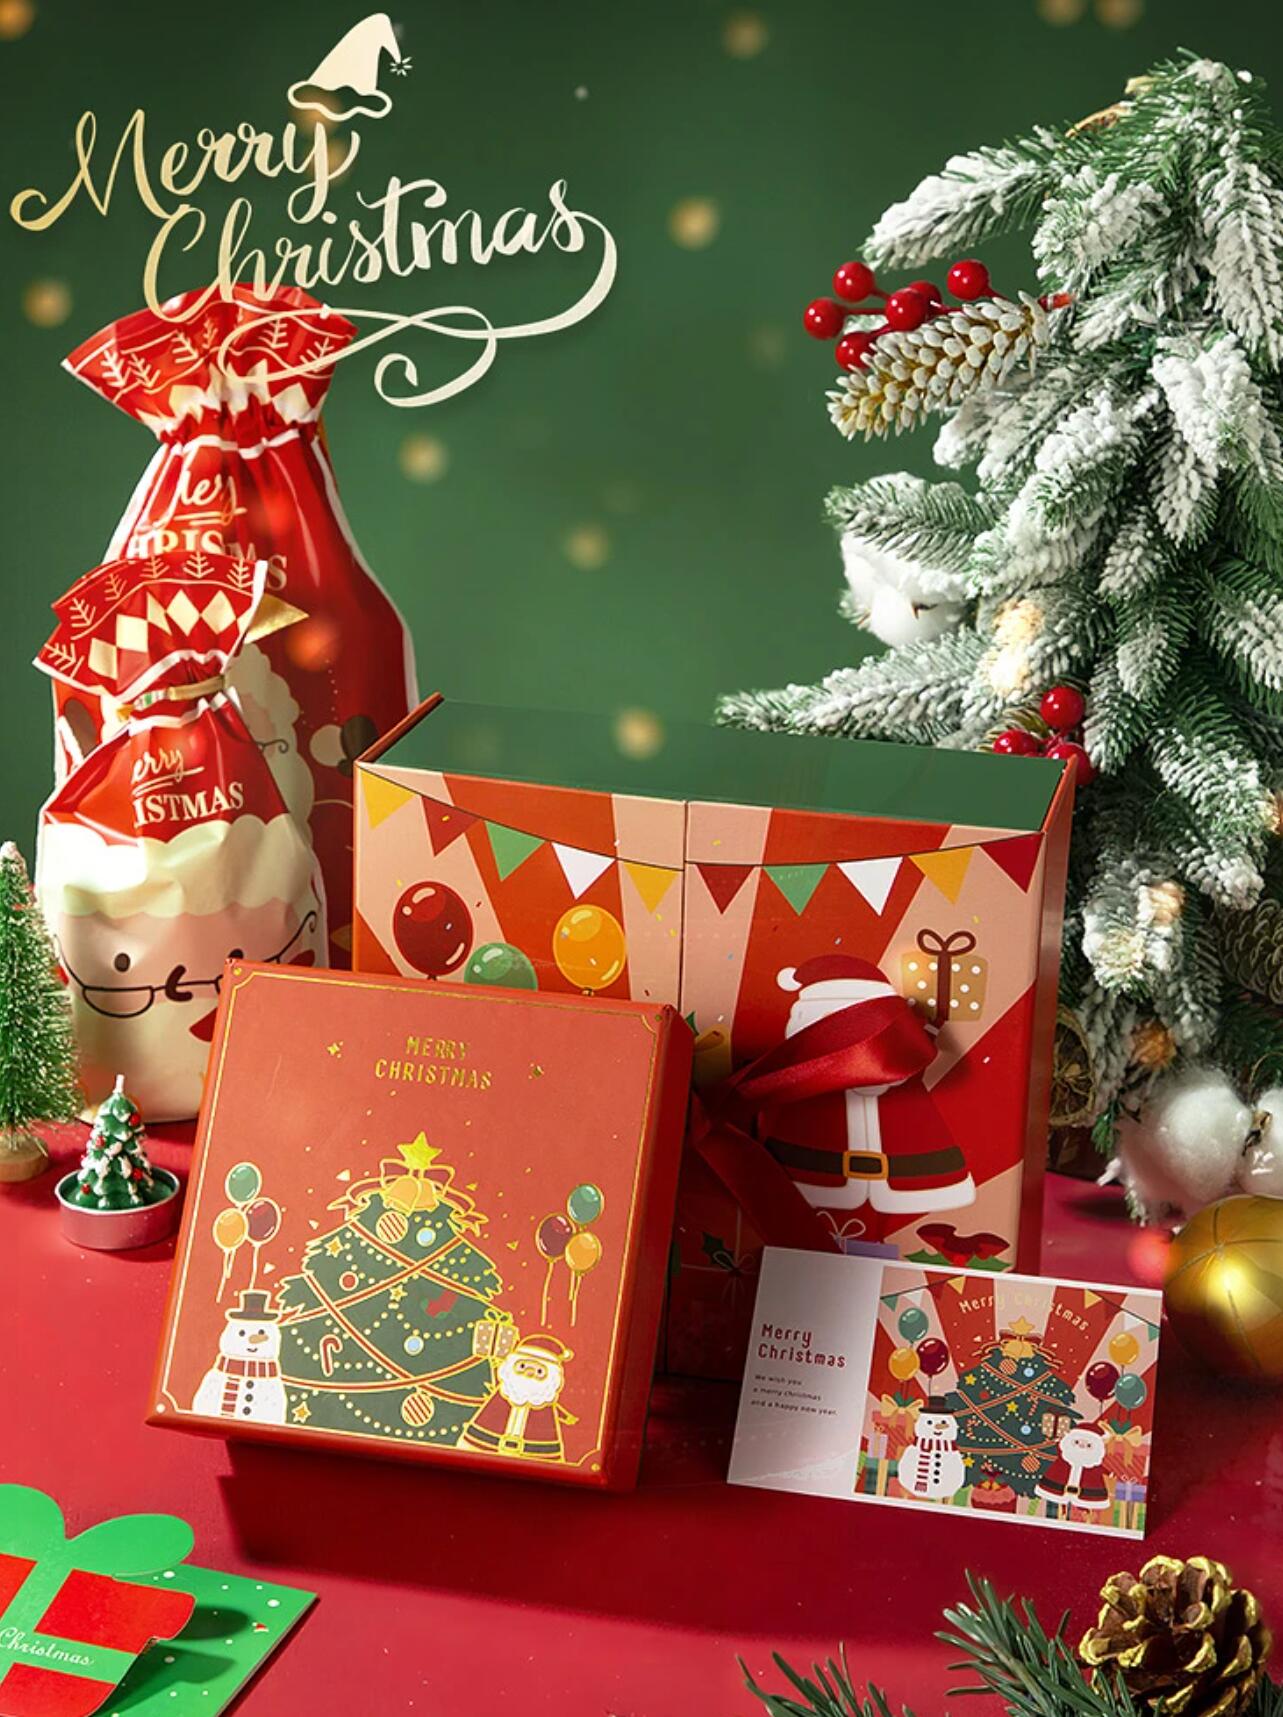 The Special Features and Latest Design Trends in Christmas Gift Box Packaging